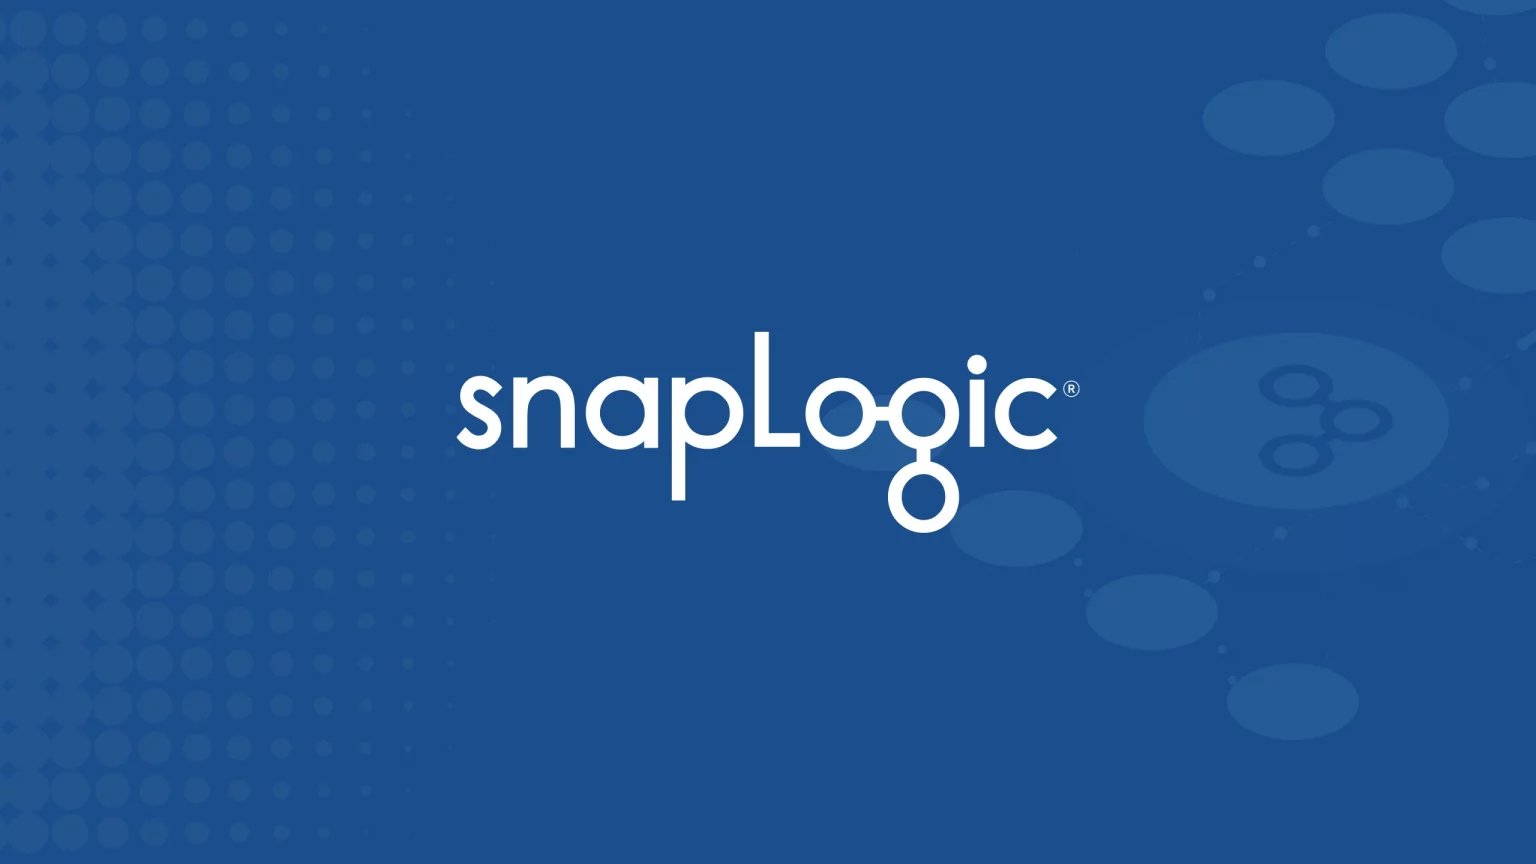 SnapLogic, which helps companies integrate and automate disparate apps and data, raises $165M at a $1B valuation led by Sixth Street Growth (Ingrid Lunden/TechCrunch)